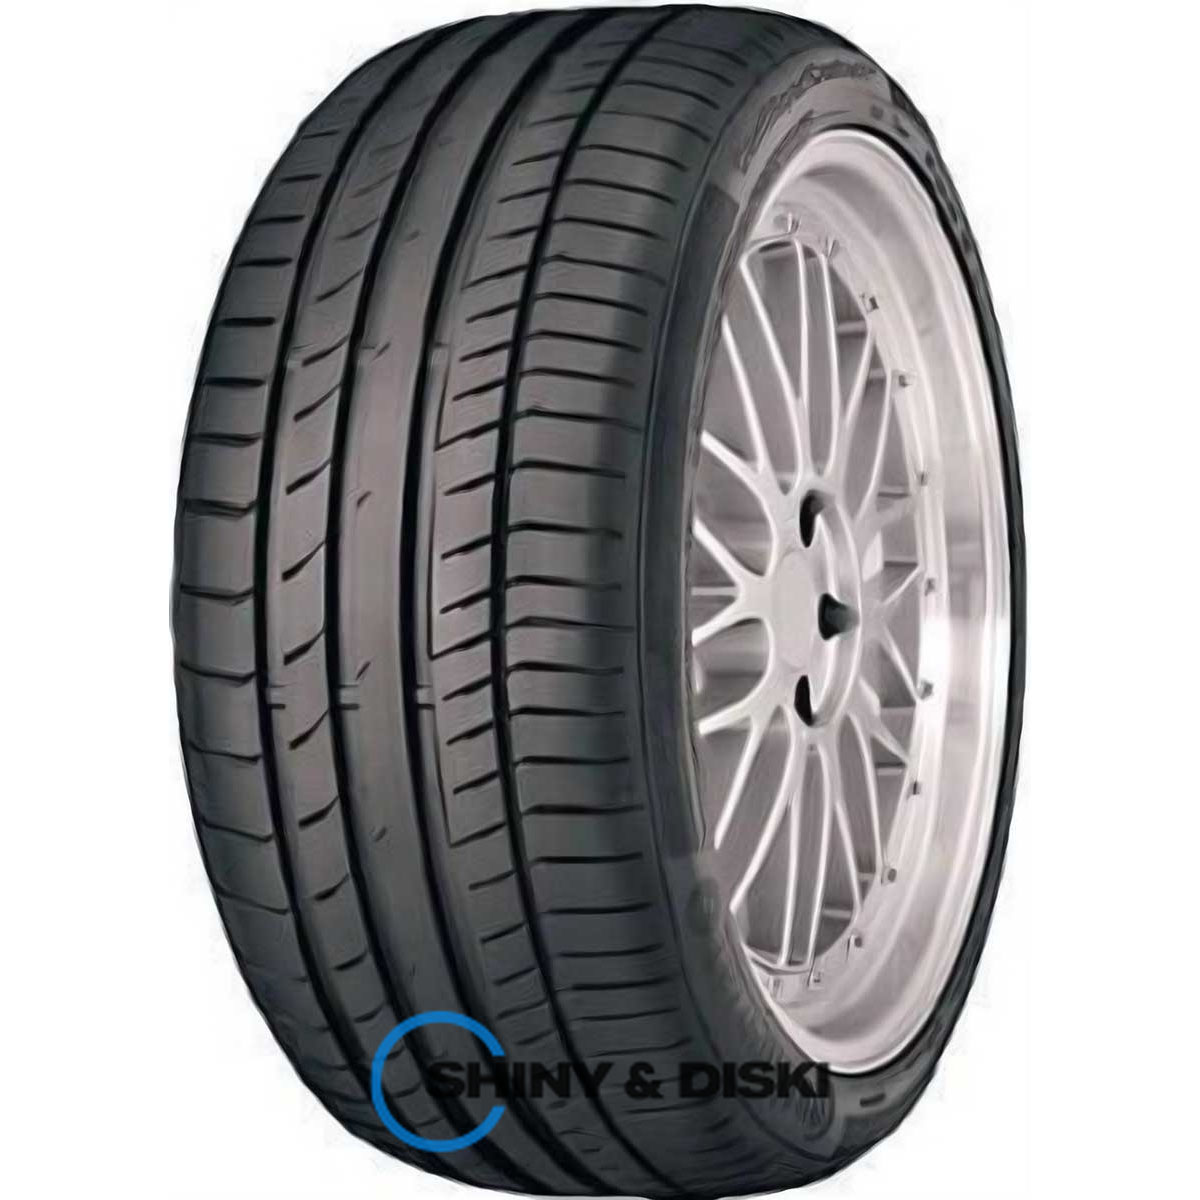 continental sportcontact 5p 255/30 r19 91y ro2